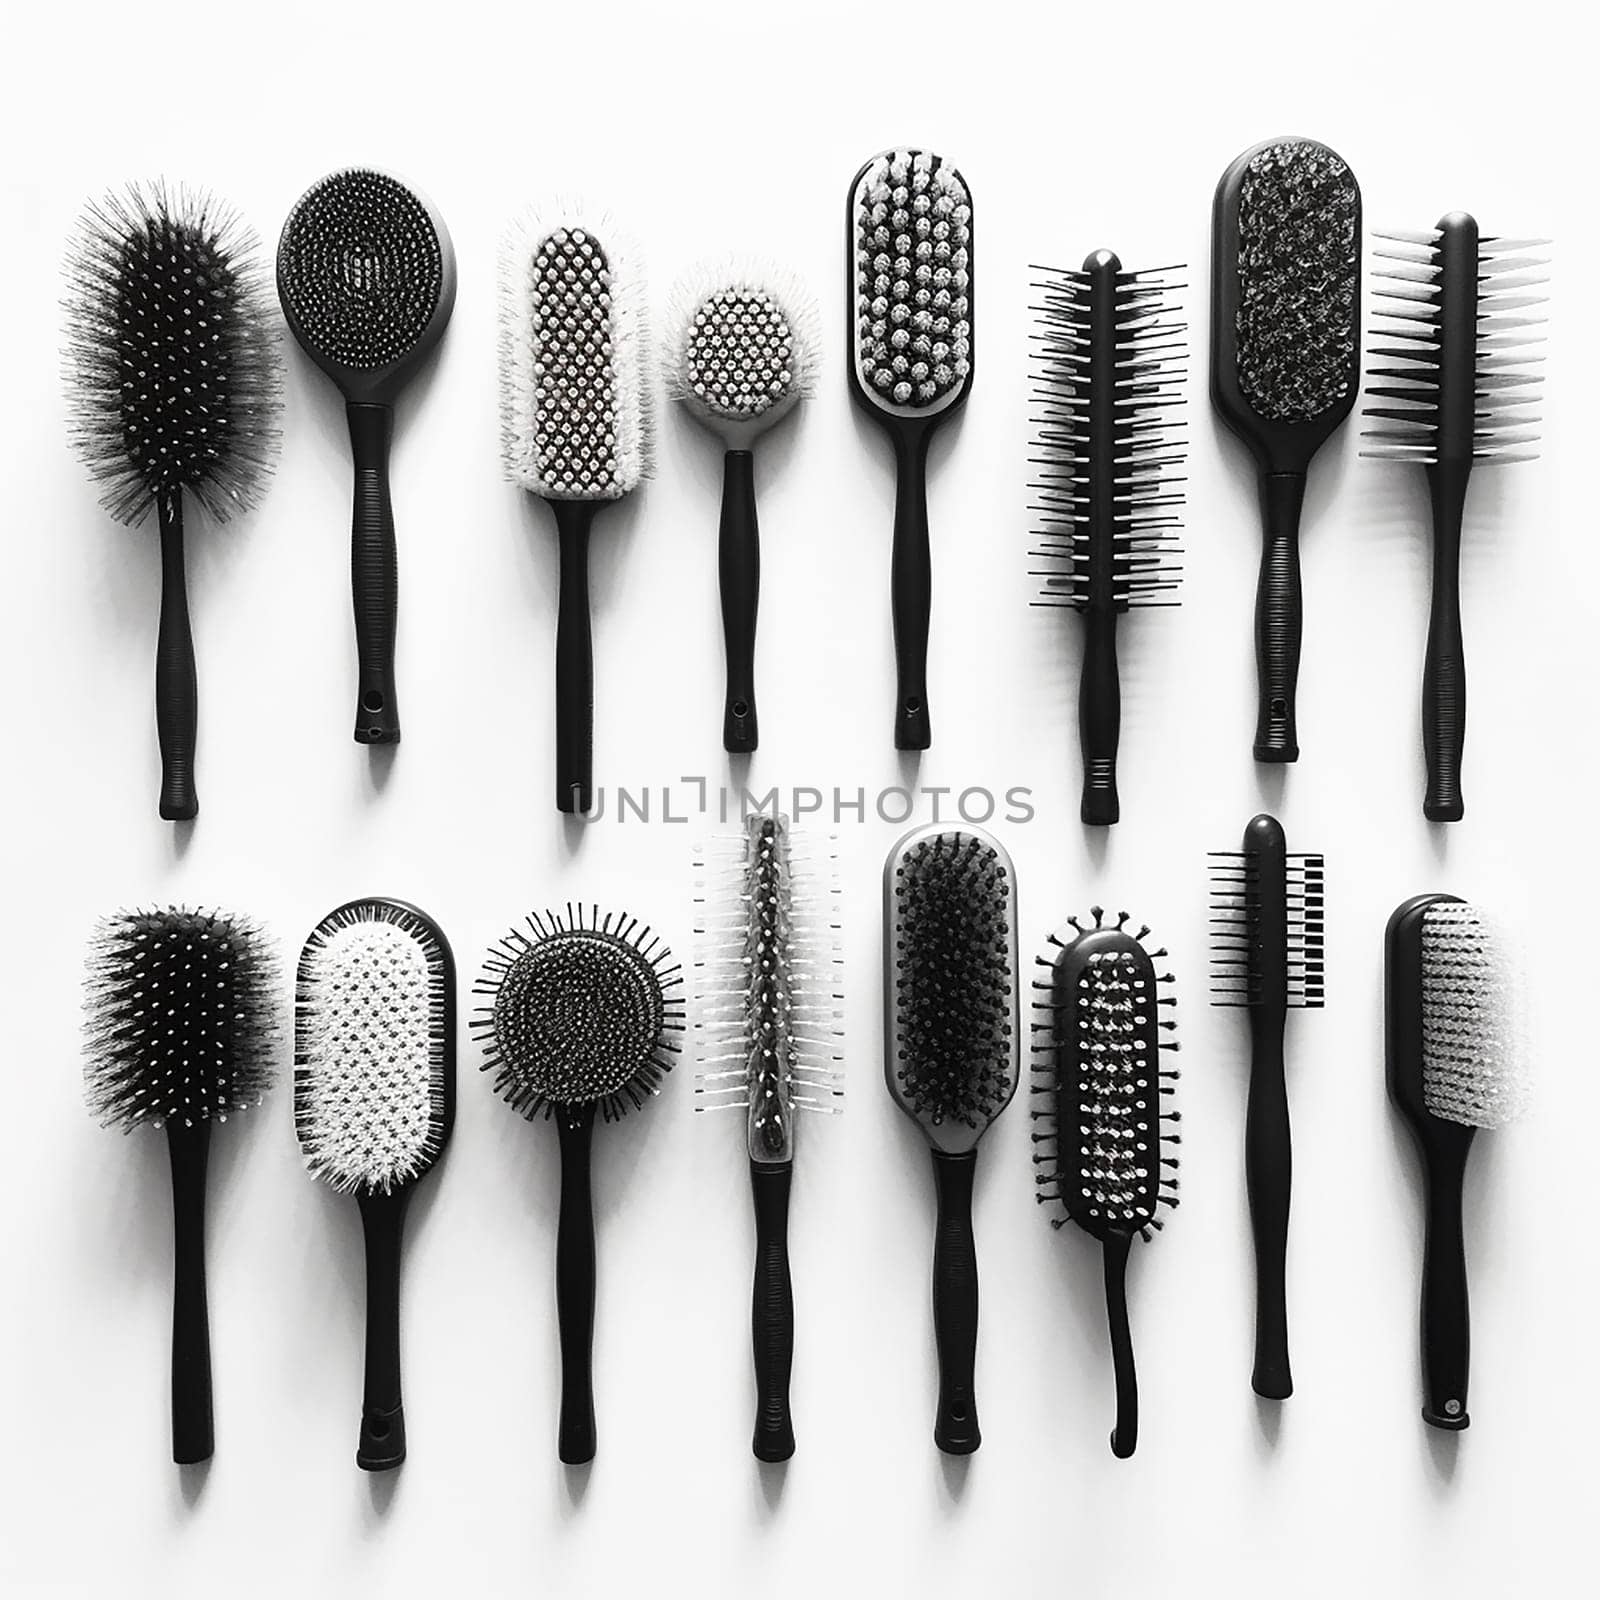 Assortment of various hairbrushes on a white background.